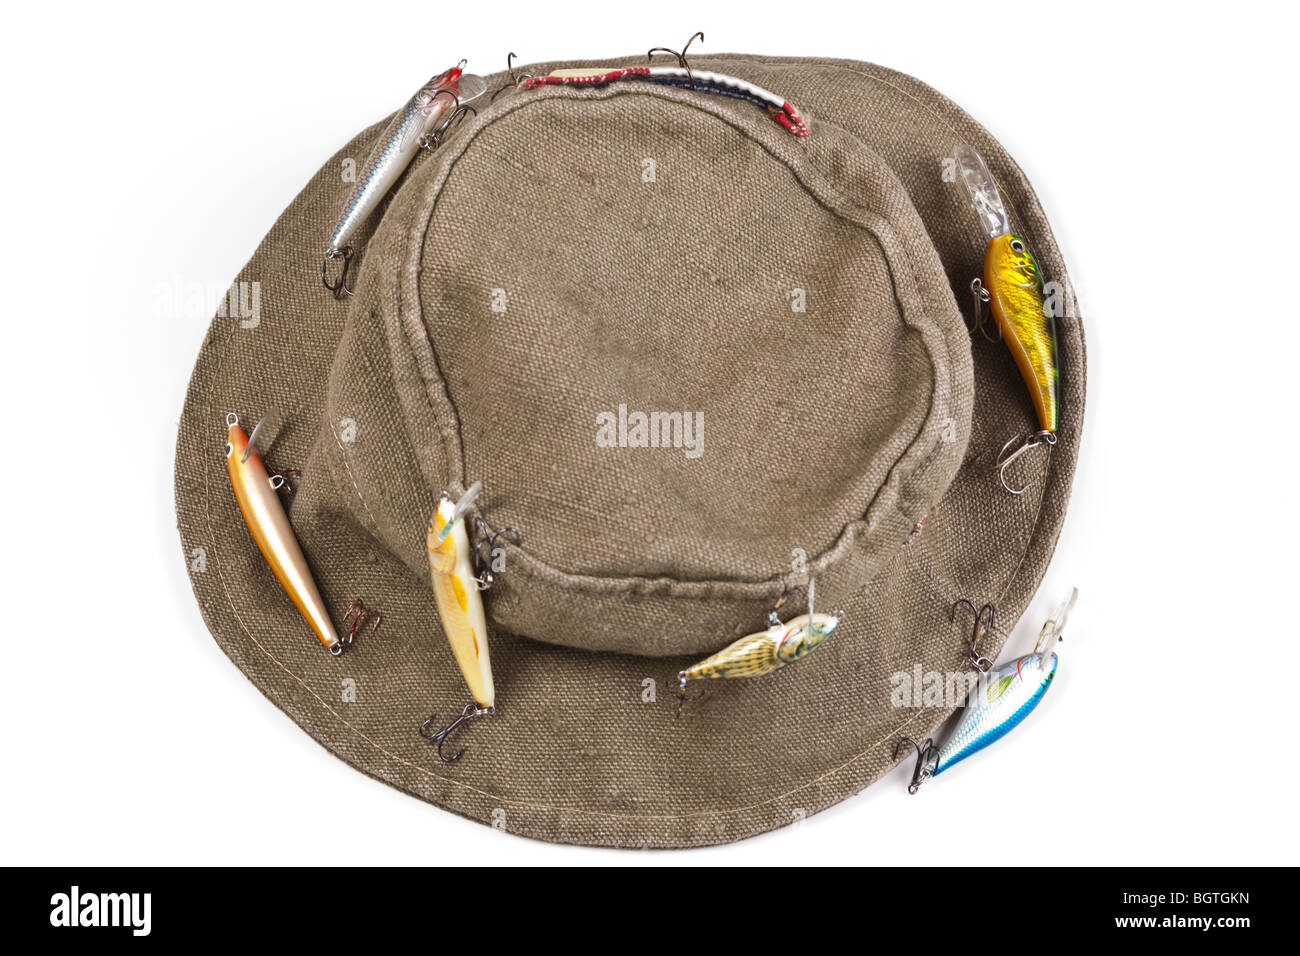 A fisherman's hat with lures attached shot against white